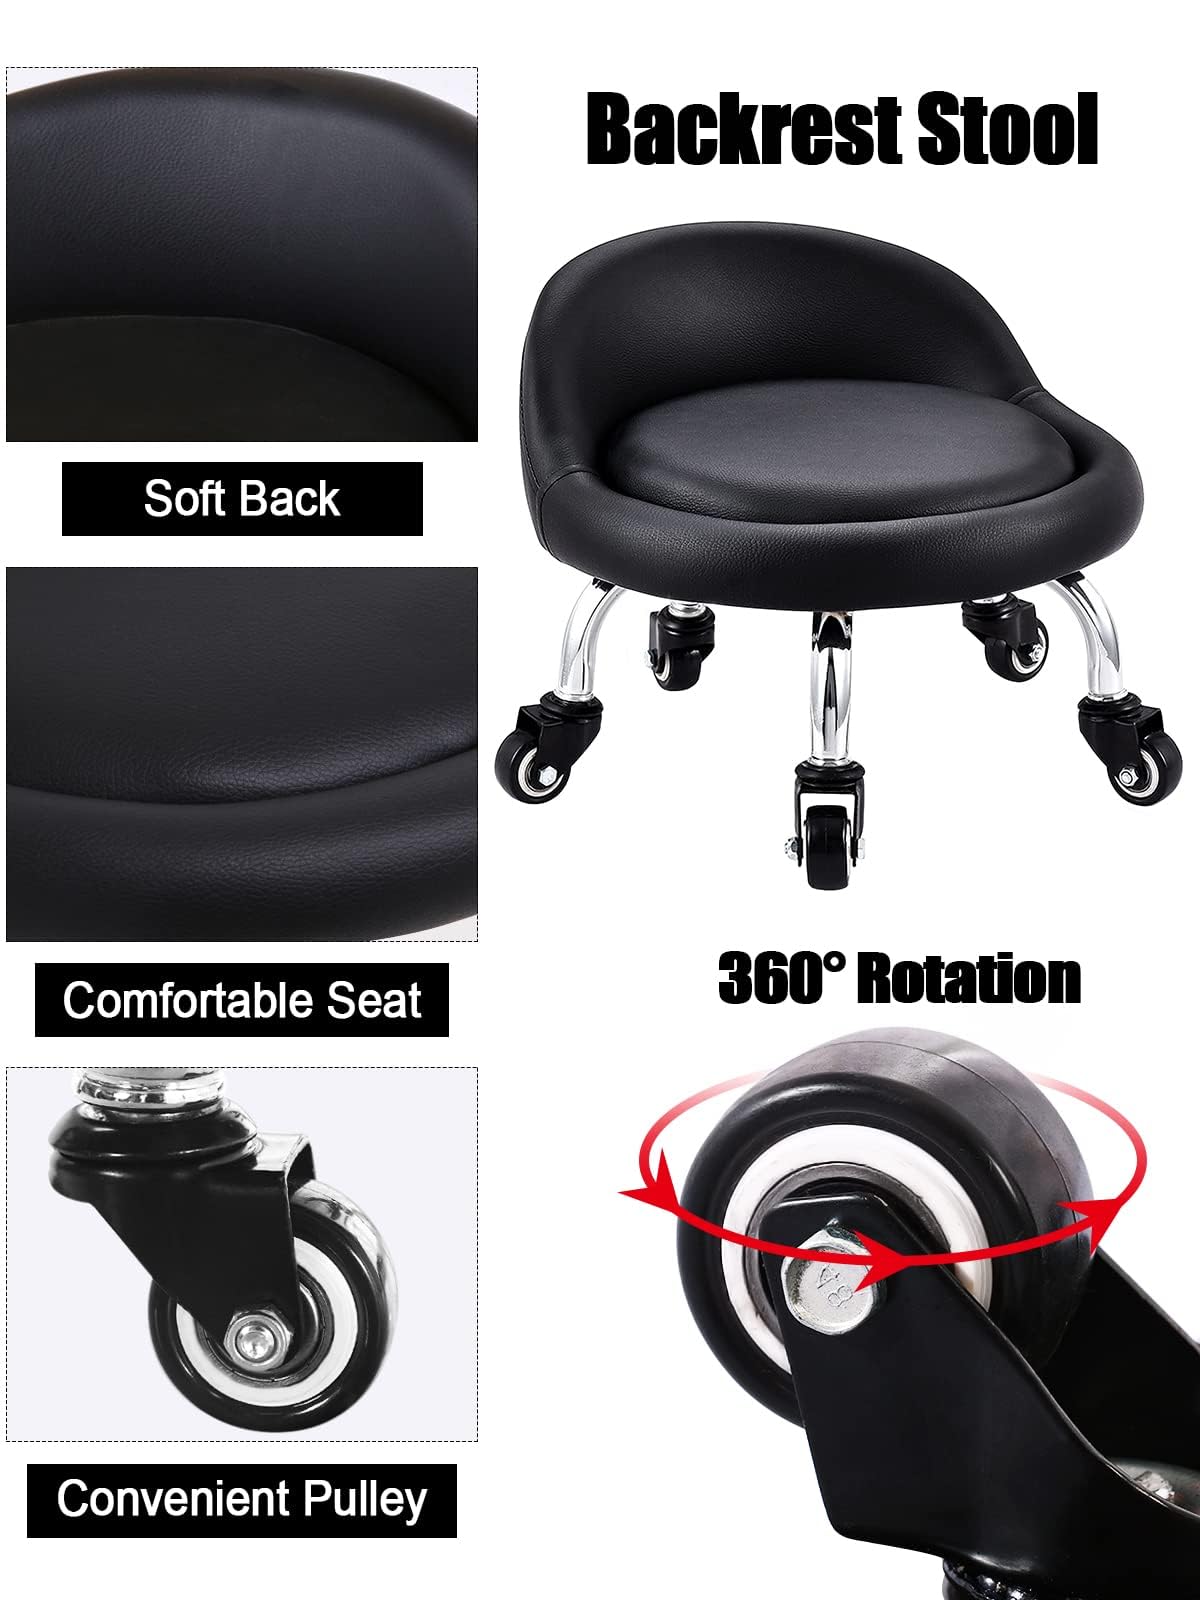 Lanstics Low Roller Seat Stools on Wheels Chair Leather Cushion Roller Seats with Back Rest Small 360 Rotating Rolling Stool Seats for Home Office Fitness Round Rolling Seat (Black)